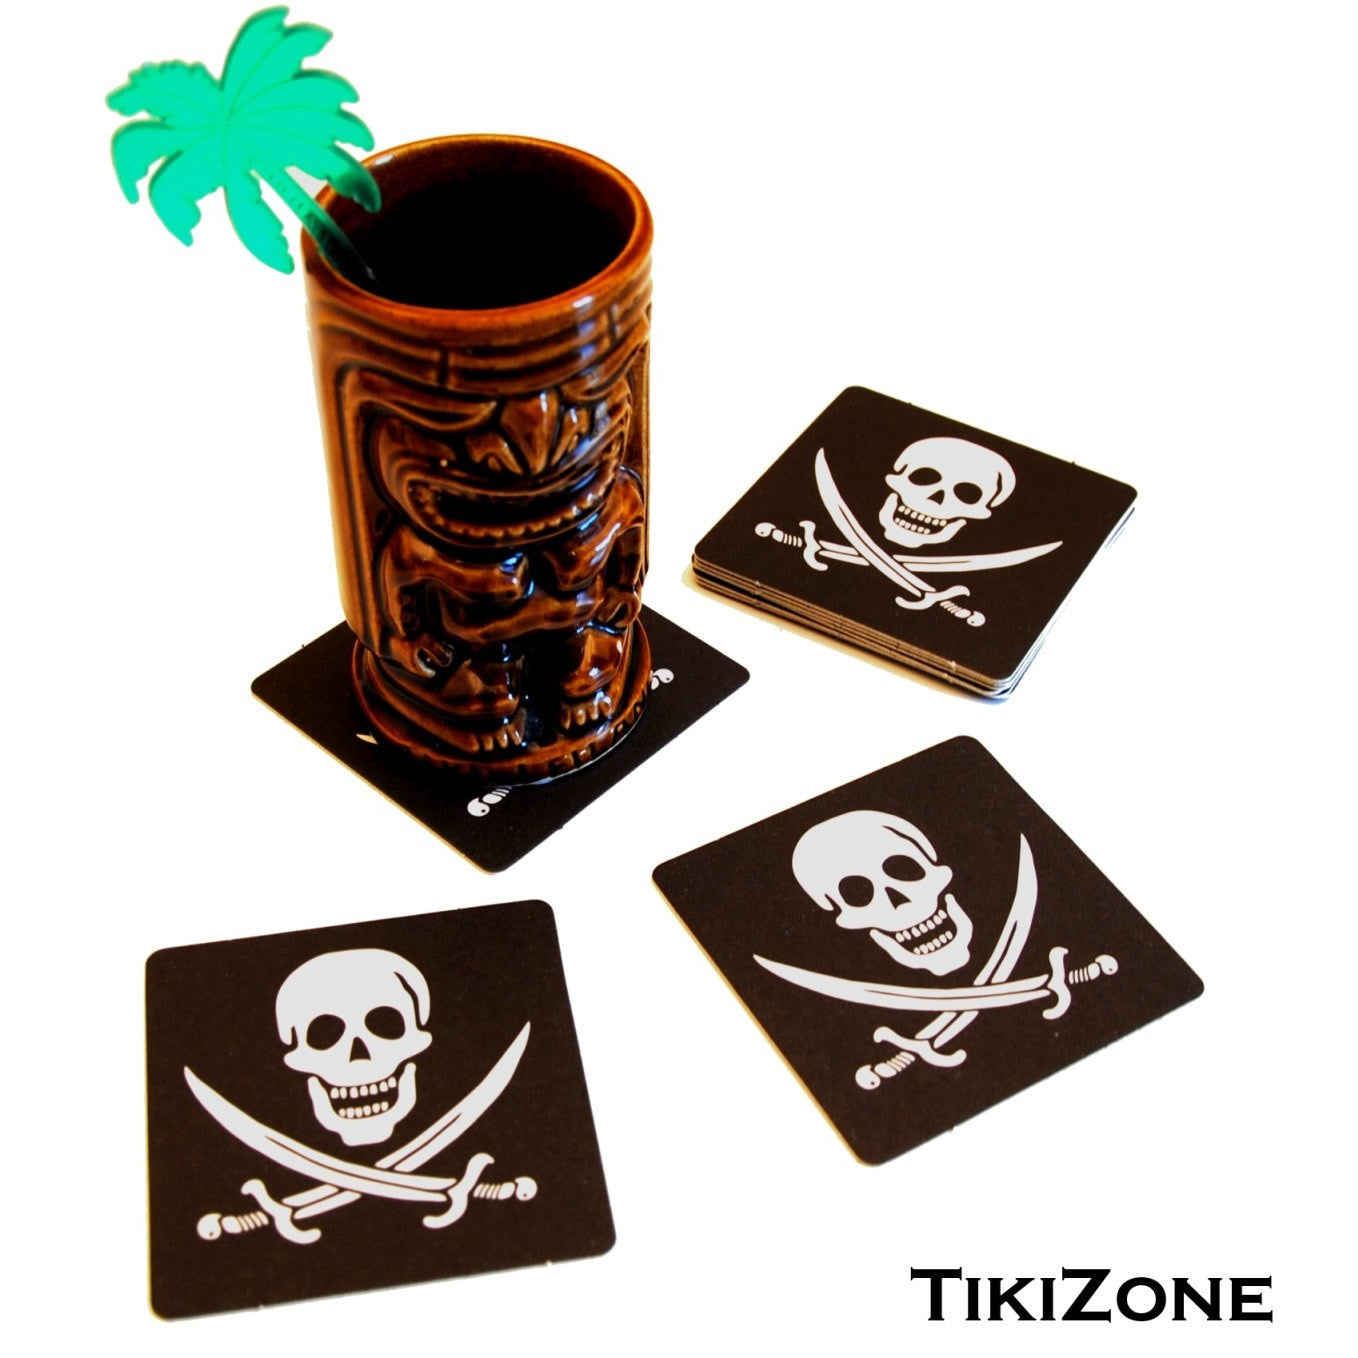 20 Jolly Roger/Pirate Flag Drink Coasters